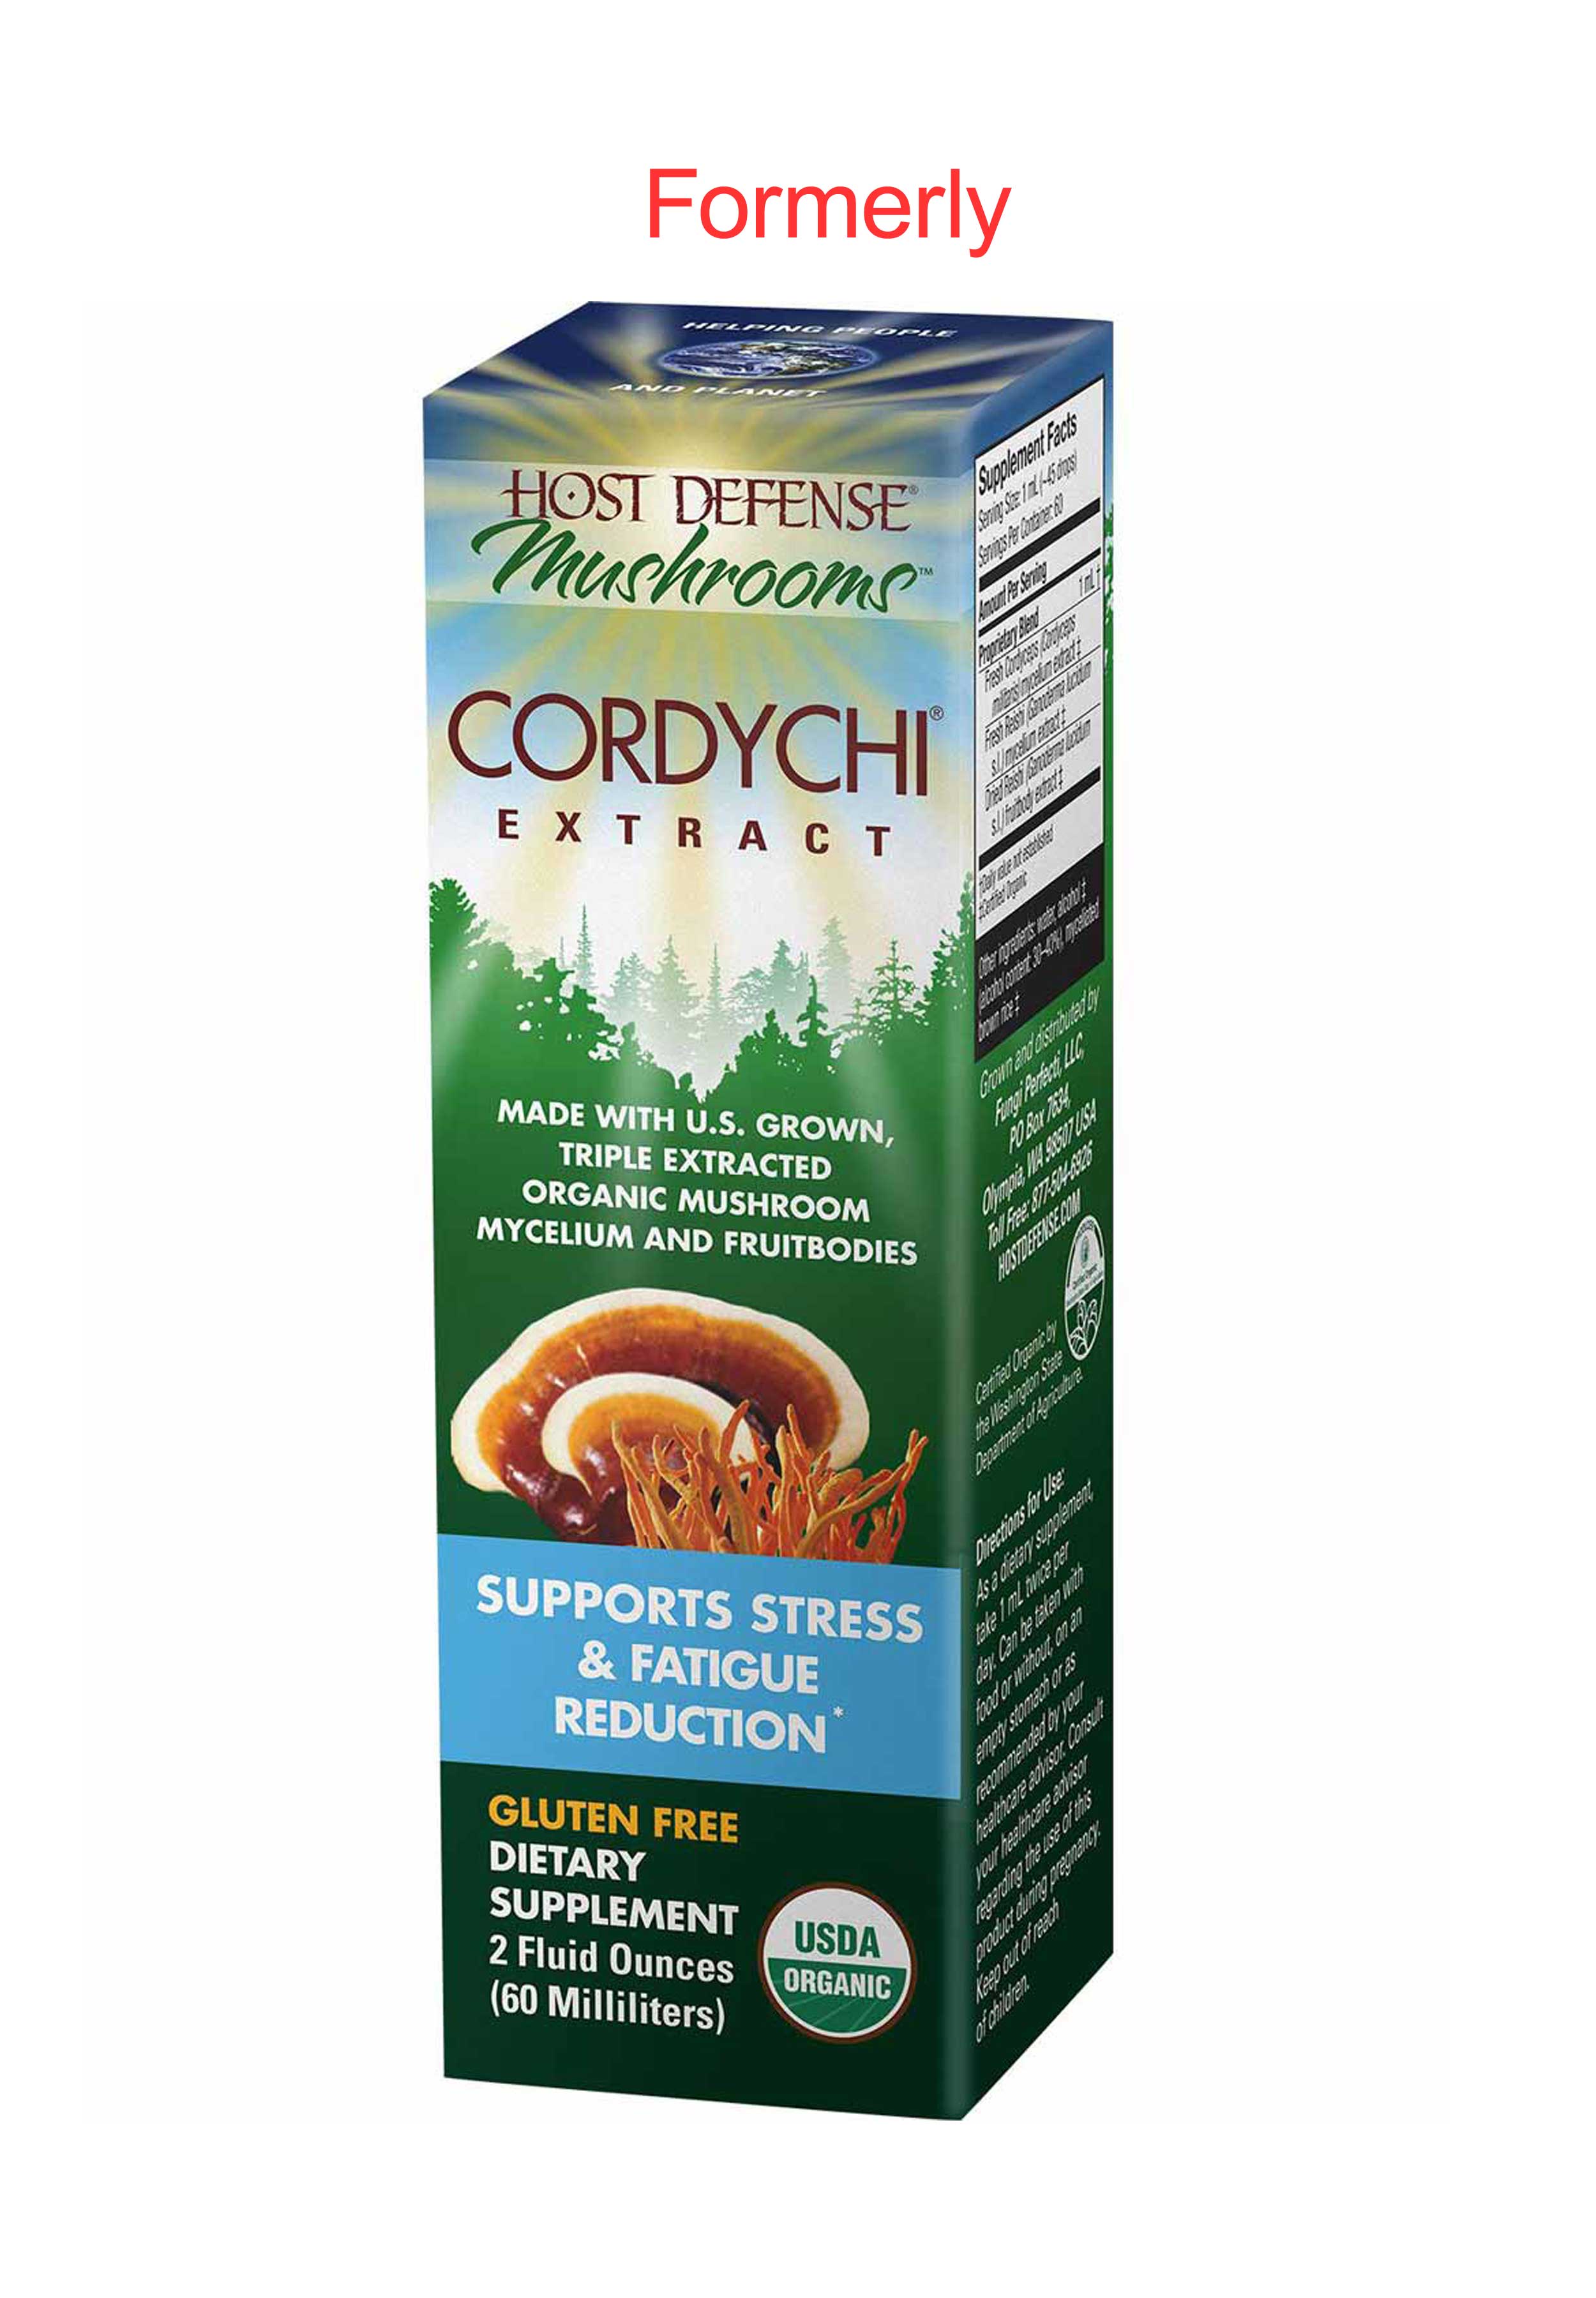 Host Defense CordyChi® Extract Formerly